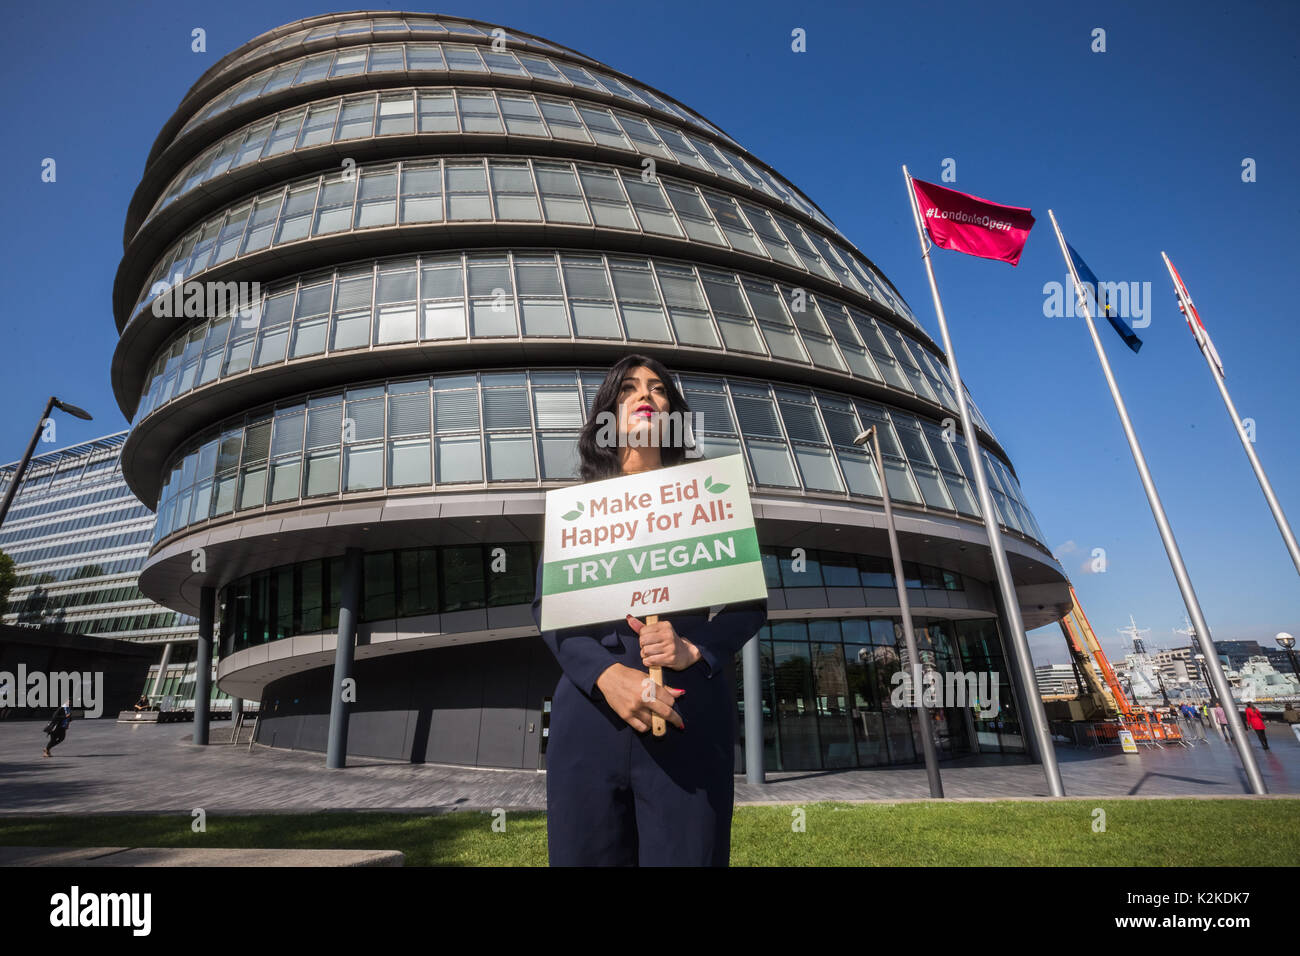 London, UK. 31st August, 2017. PETA protest outside City Hall. Asifa Lahore, Britain's first out Muslim drag queen, poses for photos during a PETA protest promoting veganism before delivering a hamper of vegan foods to London Mayor Sadiq Khan's office for Eid al-Adha holy celebration. Credit: Guy Corbishley/Alamy Live News Stock Photo